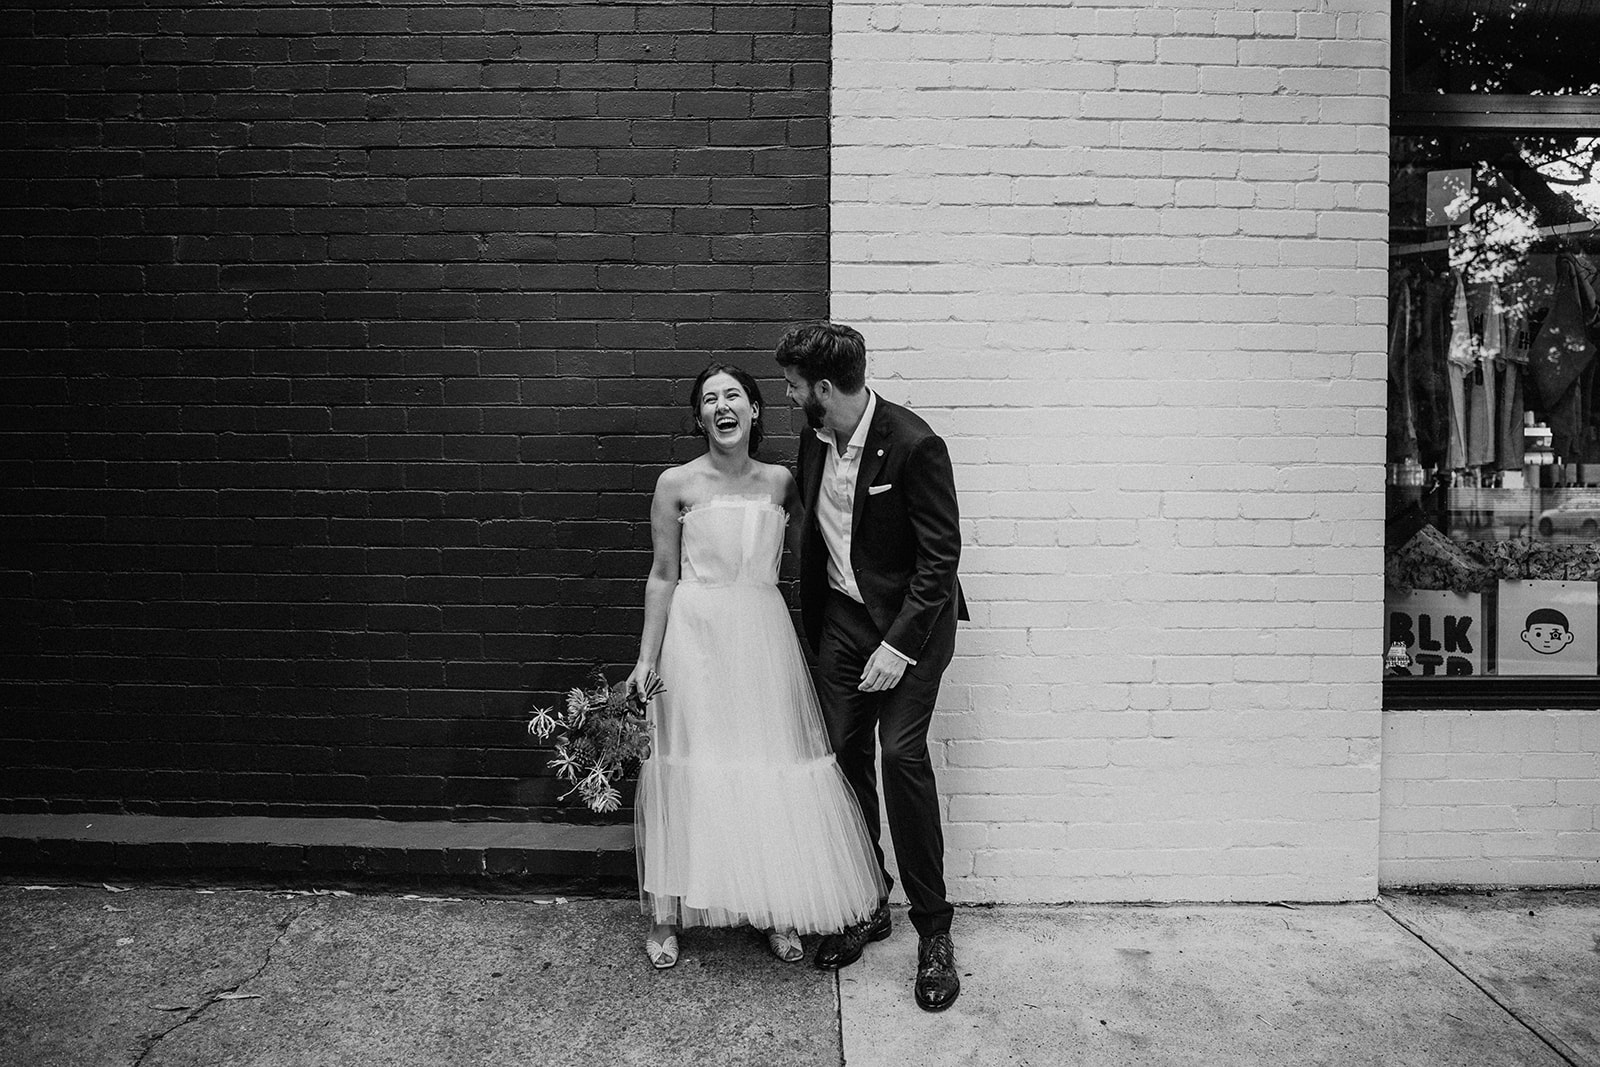 Scott Surplice portrait of bride and groom on black and white wall as couple laugh